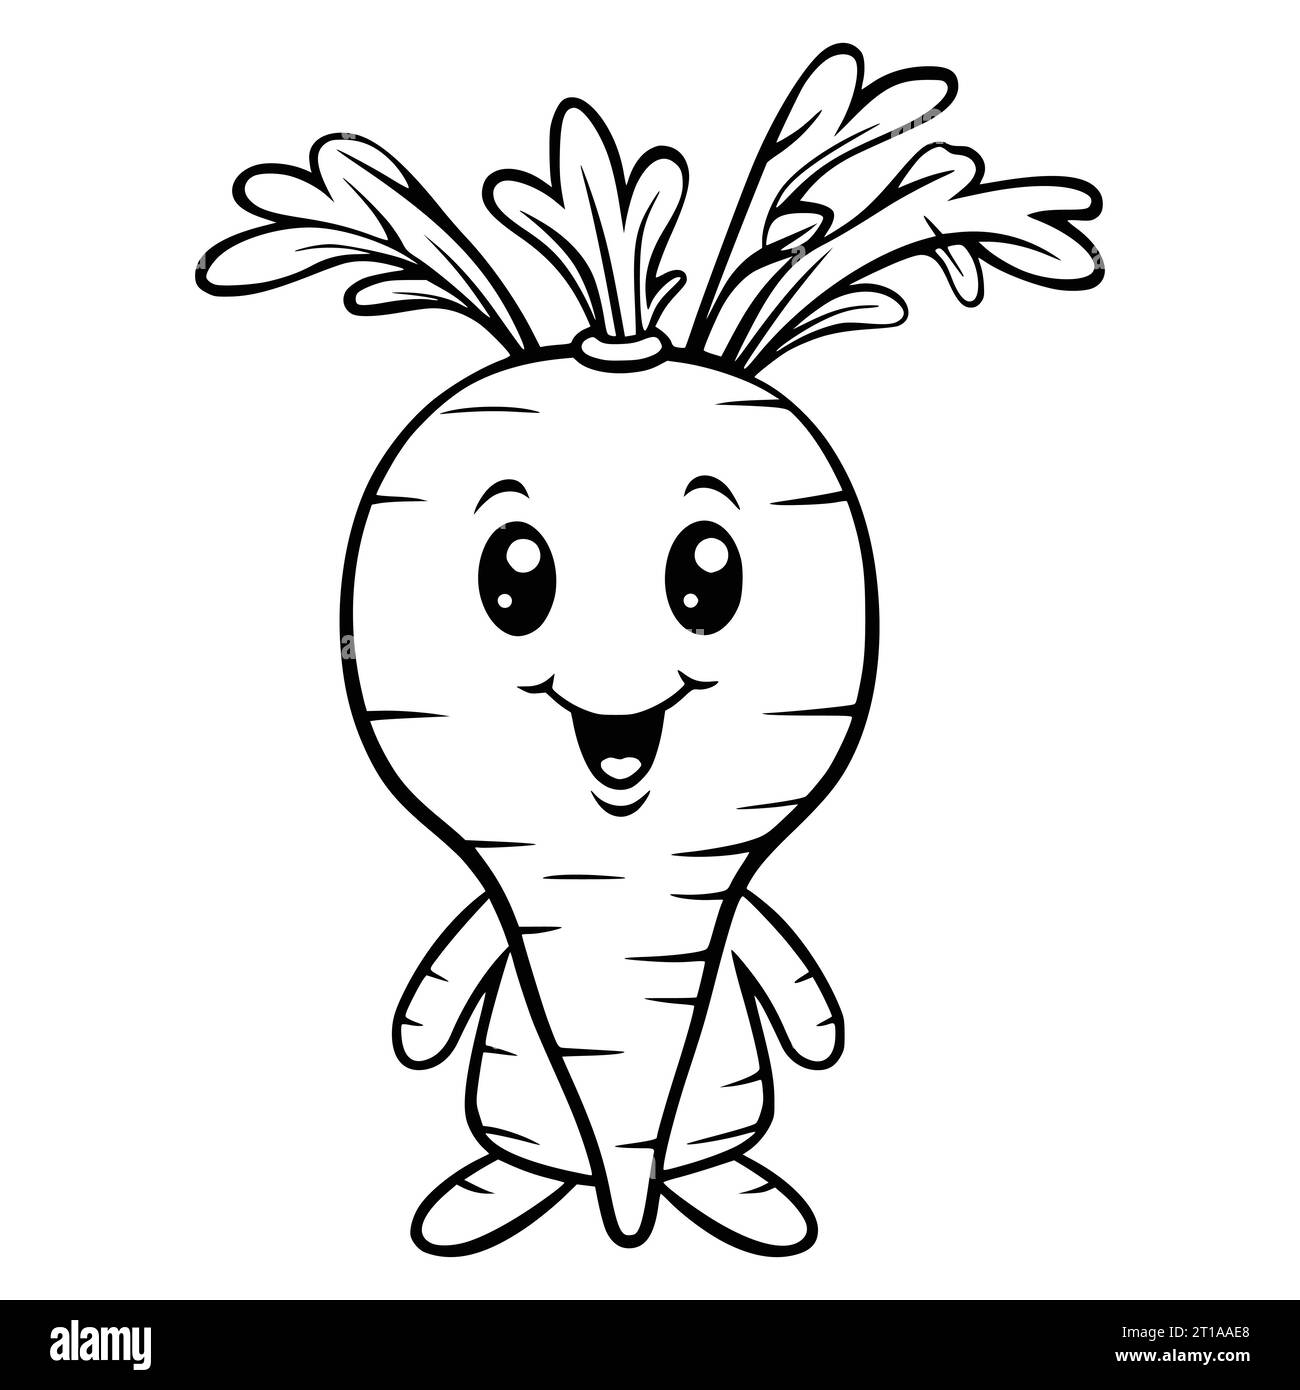 Kid Hand Drawing Vector PNG Images, Hand Drawing Cute Cartoon Carrot For  Kids Sticker, Carrot, Sticker, Cartoon PNG Image For Free Download